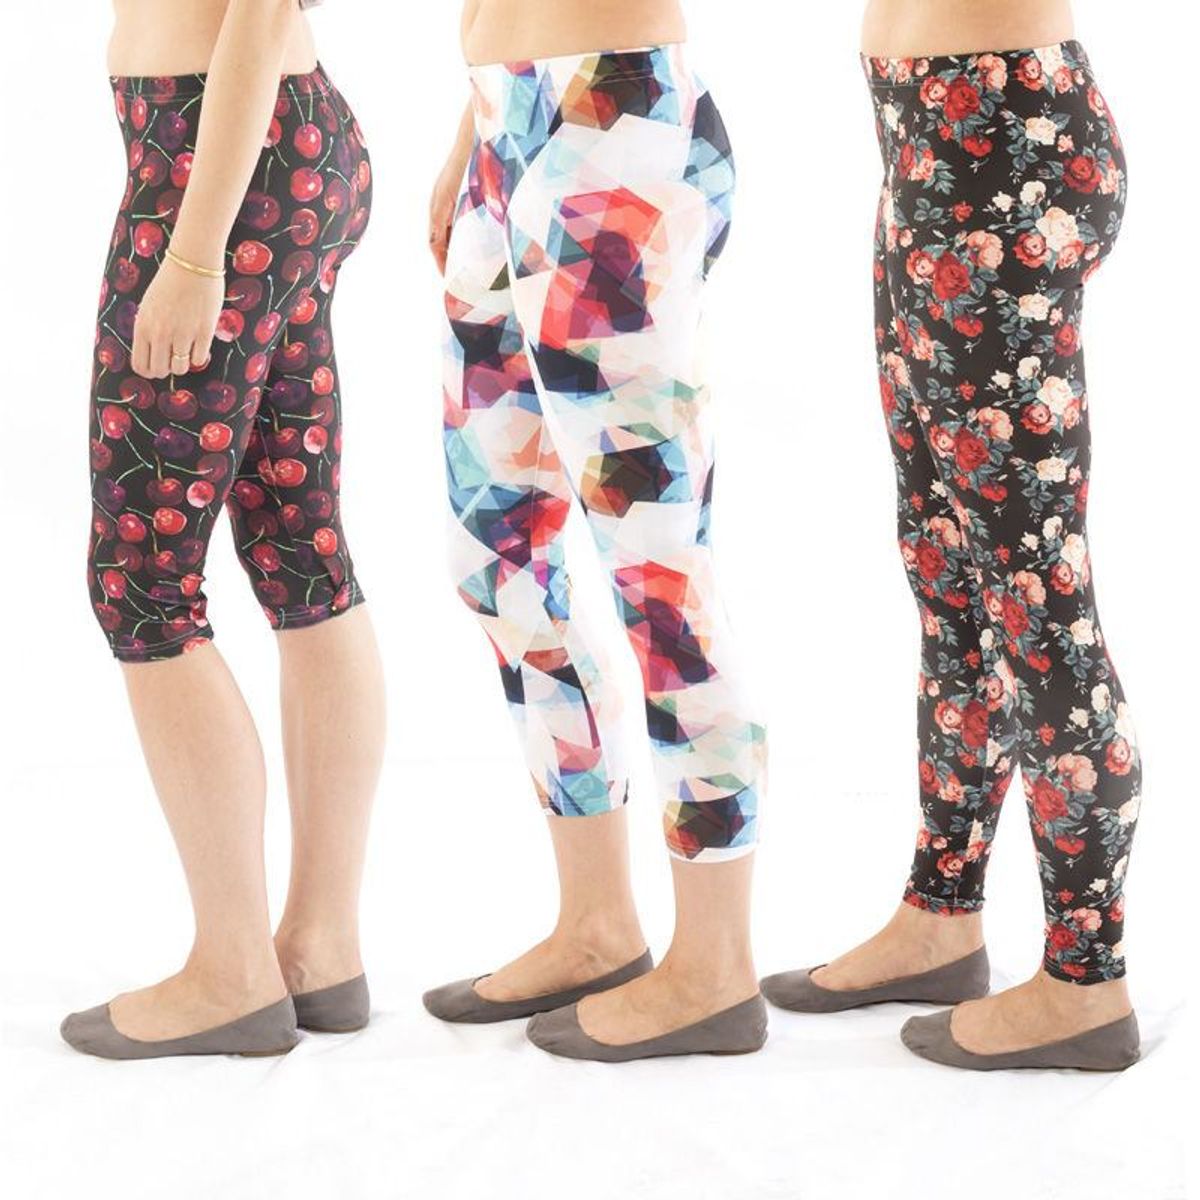 Made To Order Printed Leggings - WOMEN from Fashion Crossover London UK